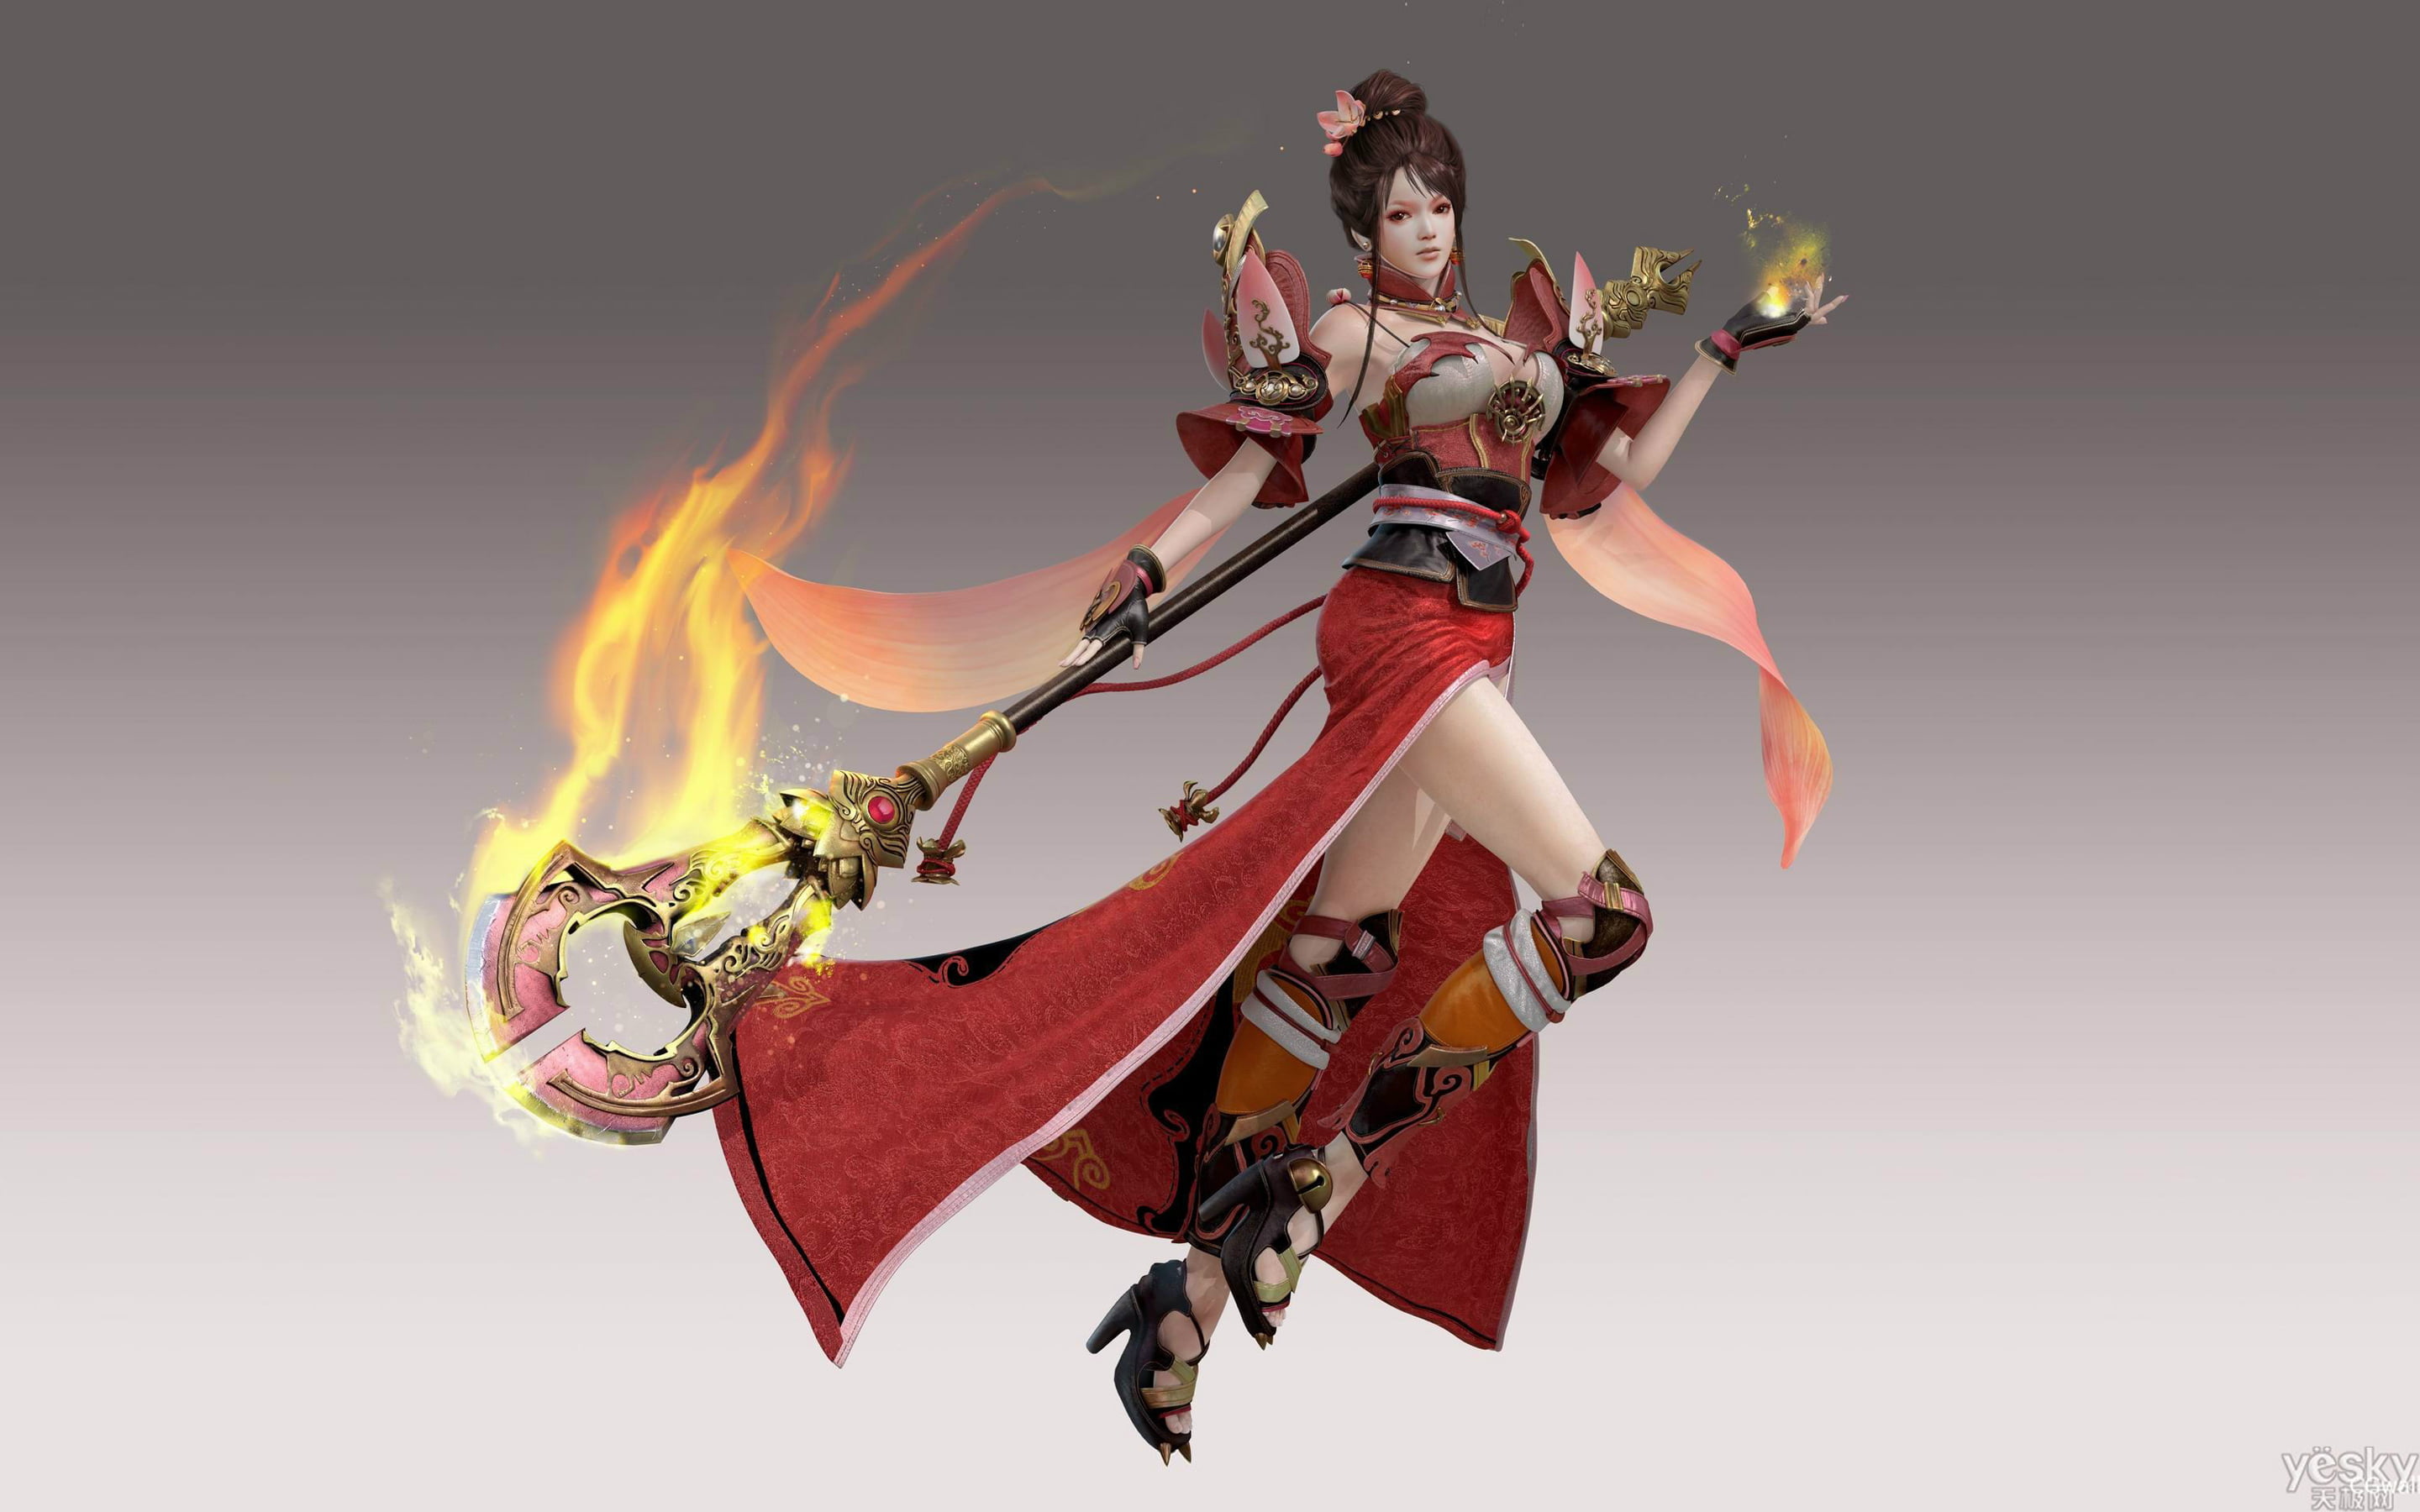 Asian Girl Fighter Feminine Beauty Red Clothes Magic Stick Flame Wallpaper For Desktop